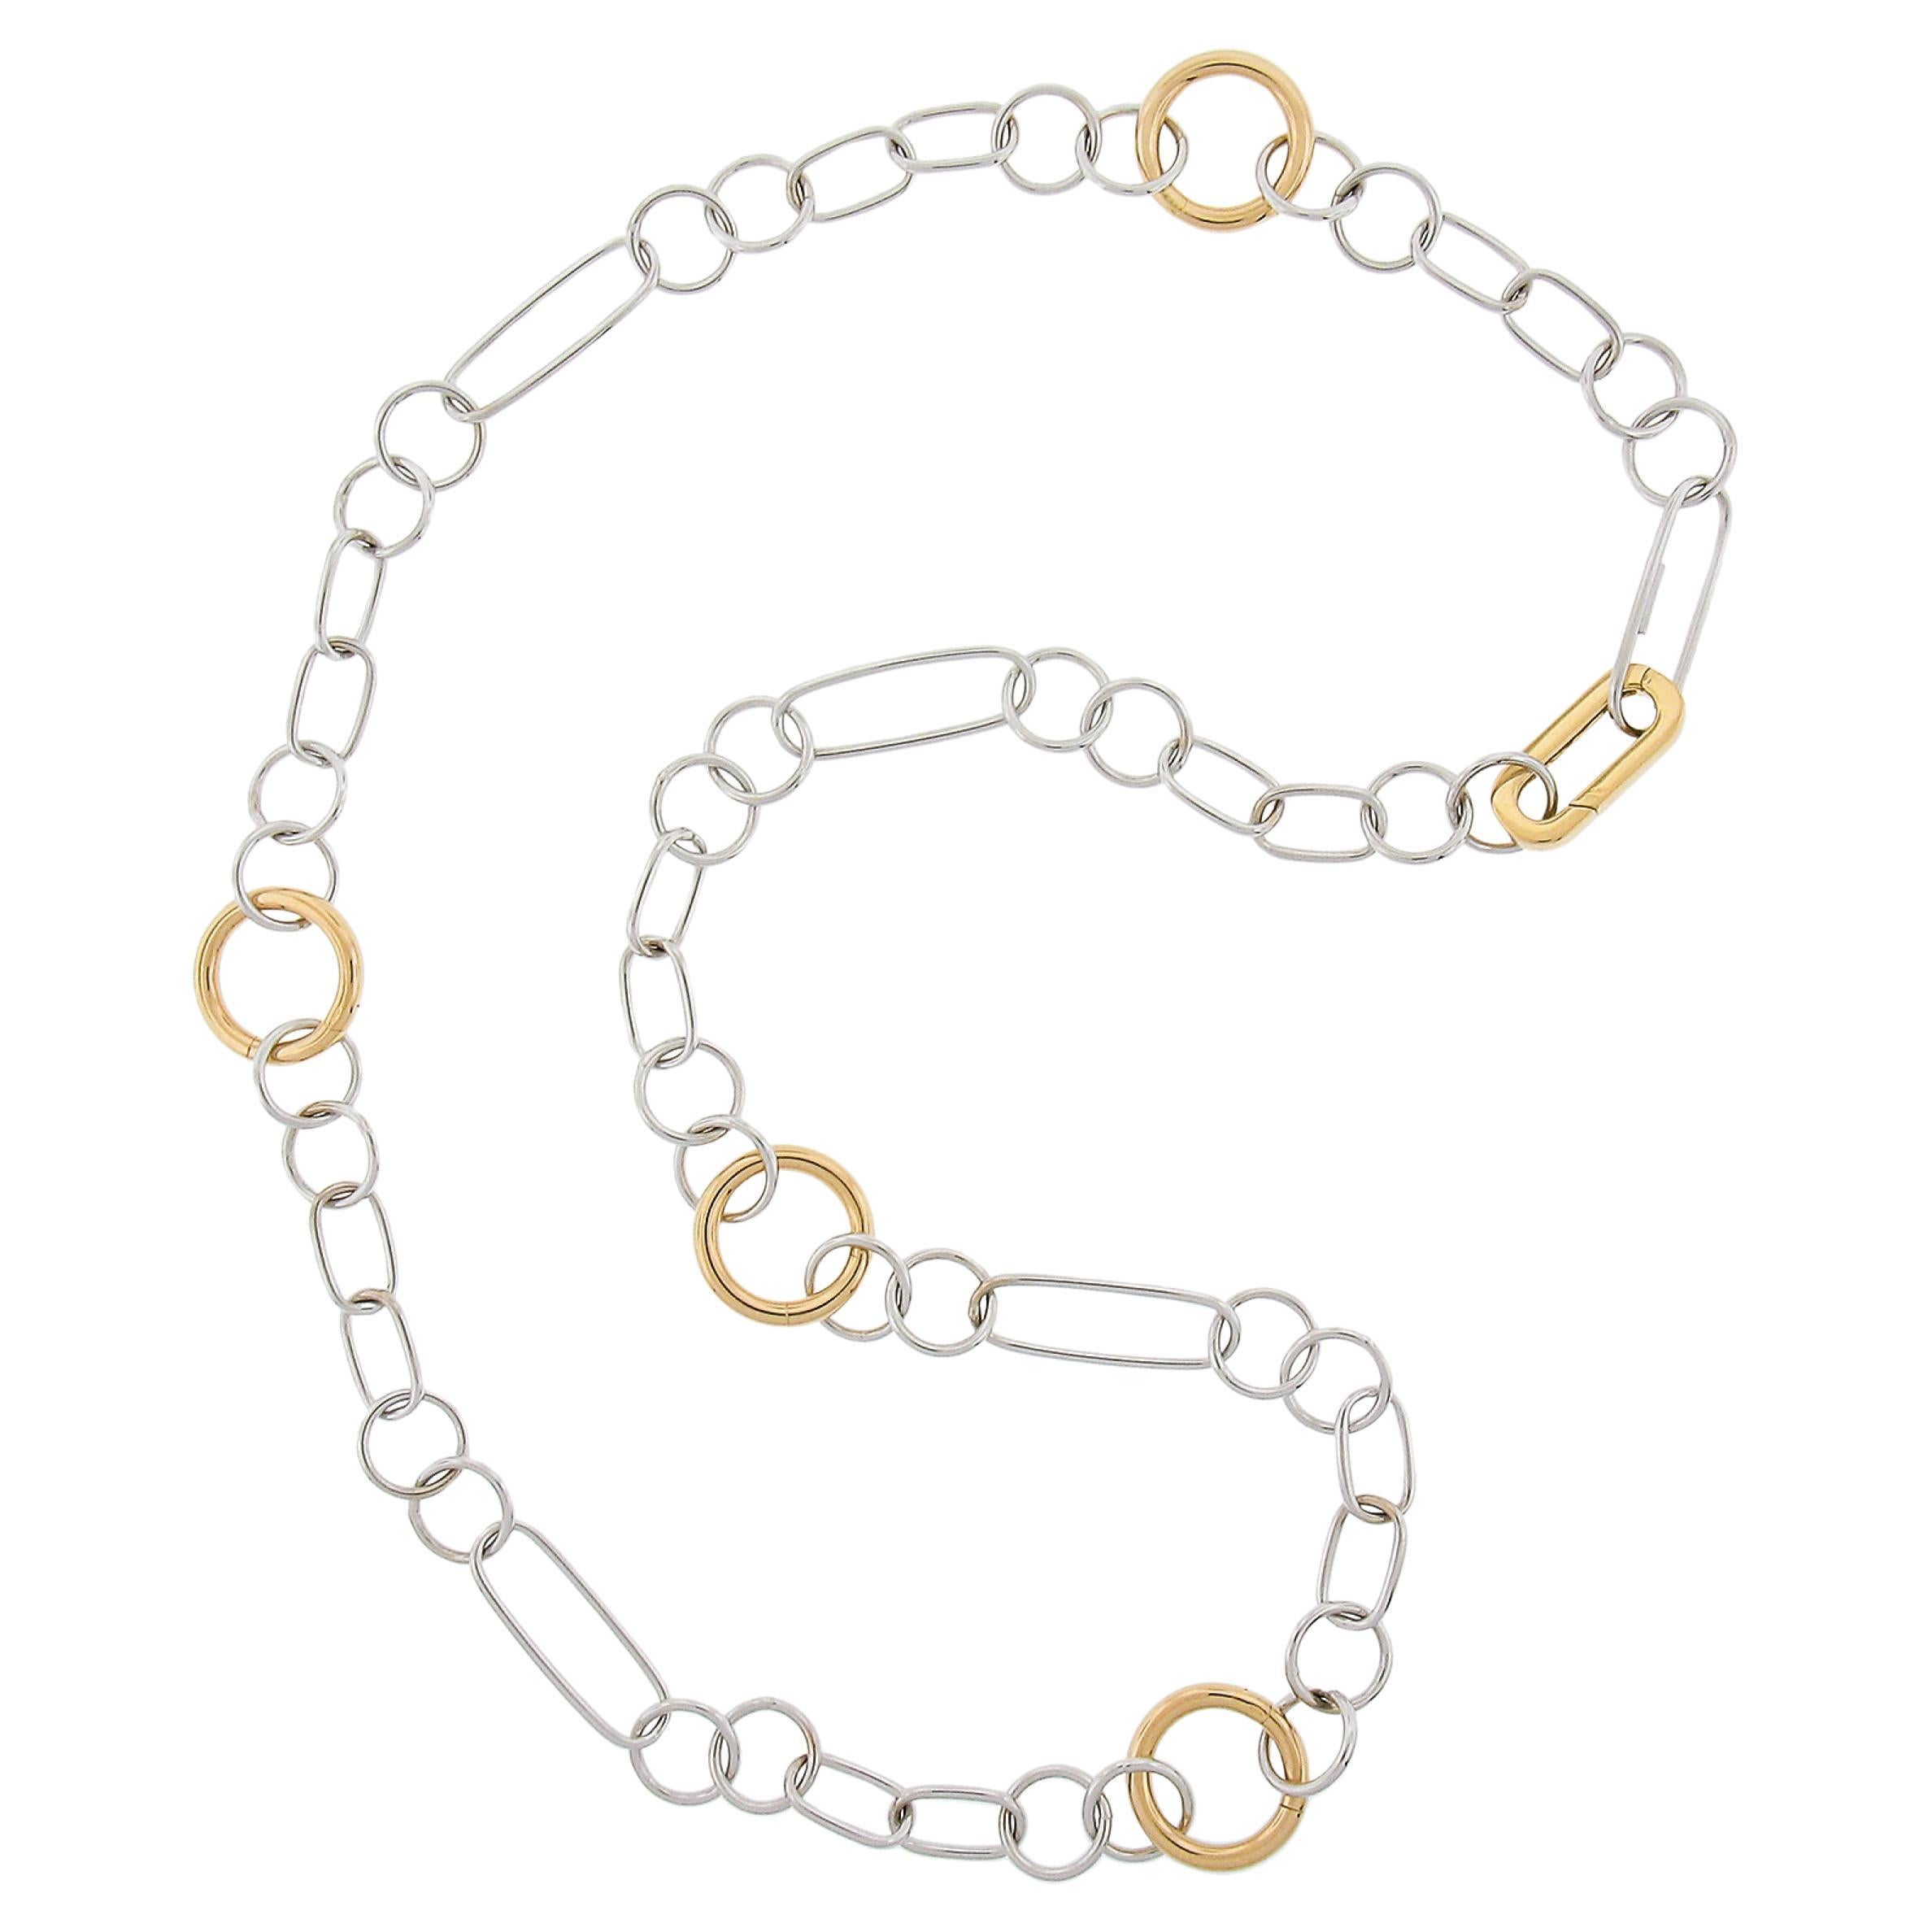 18K Yellow & White Gold Long 27" Polished Open Link Chain Necklace or Bracelet For Sale